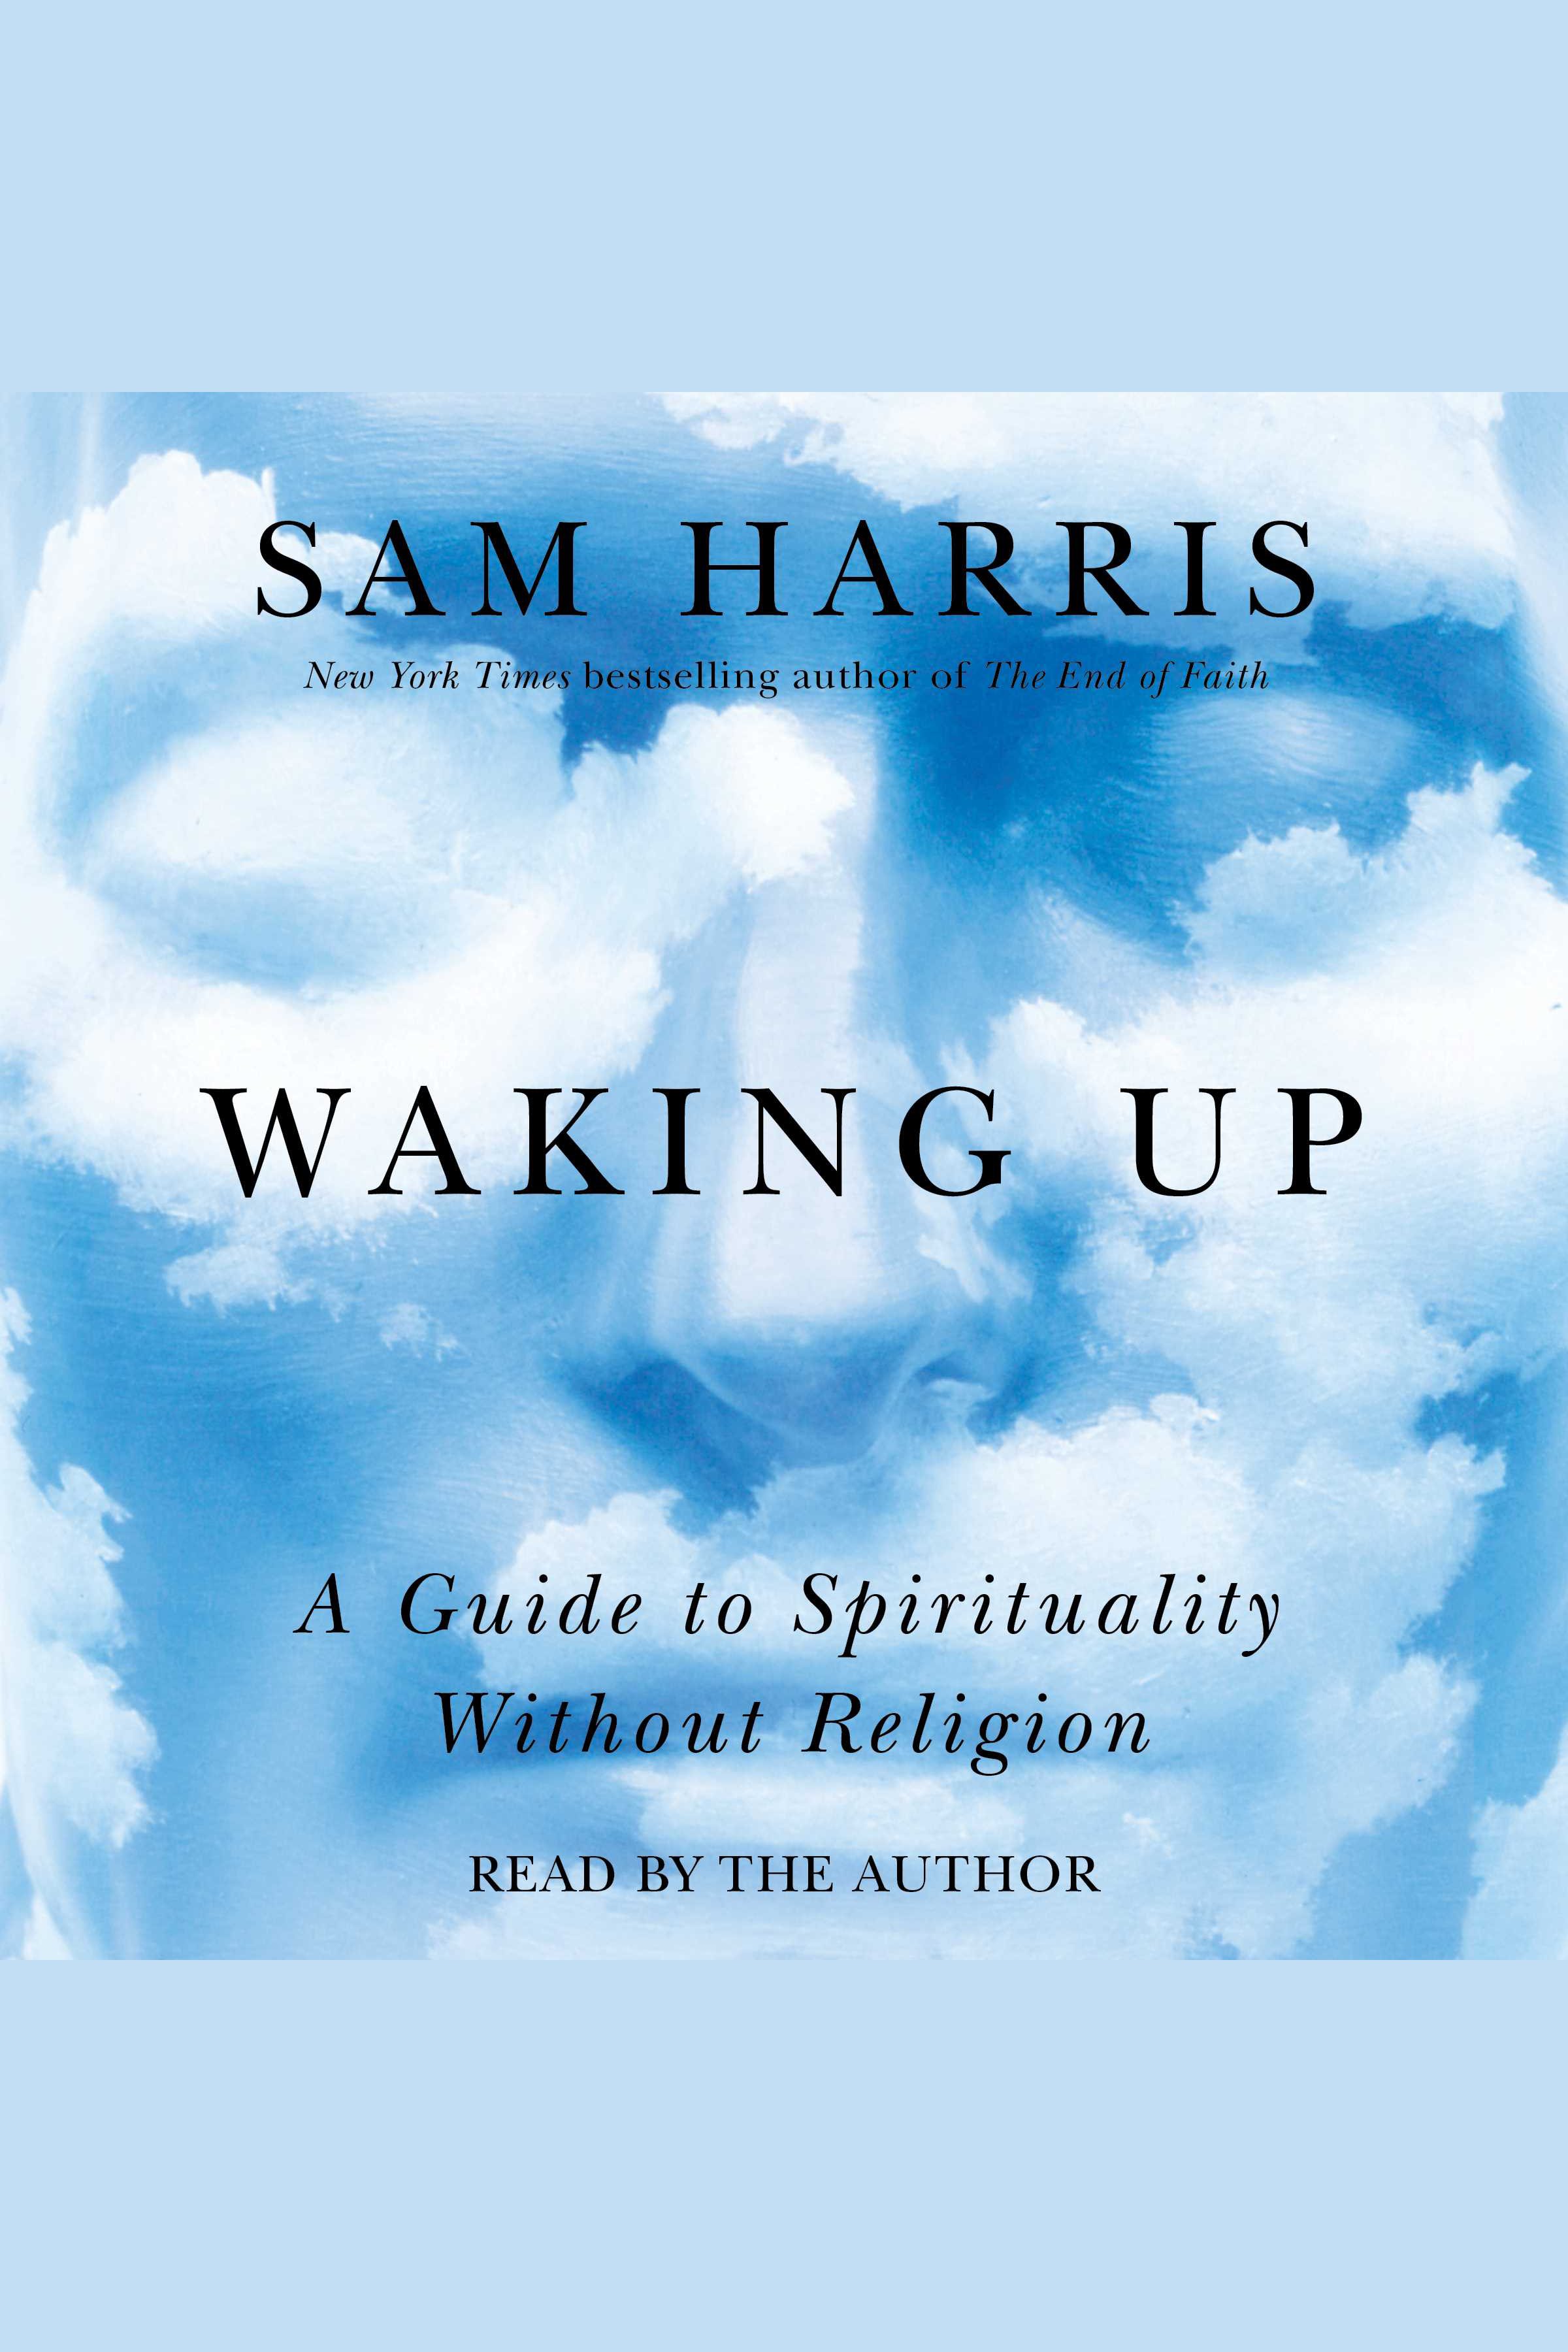 Waking up a guide to spirituality without religion cover image